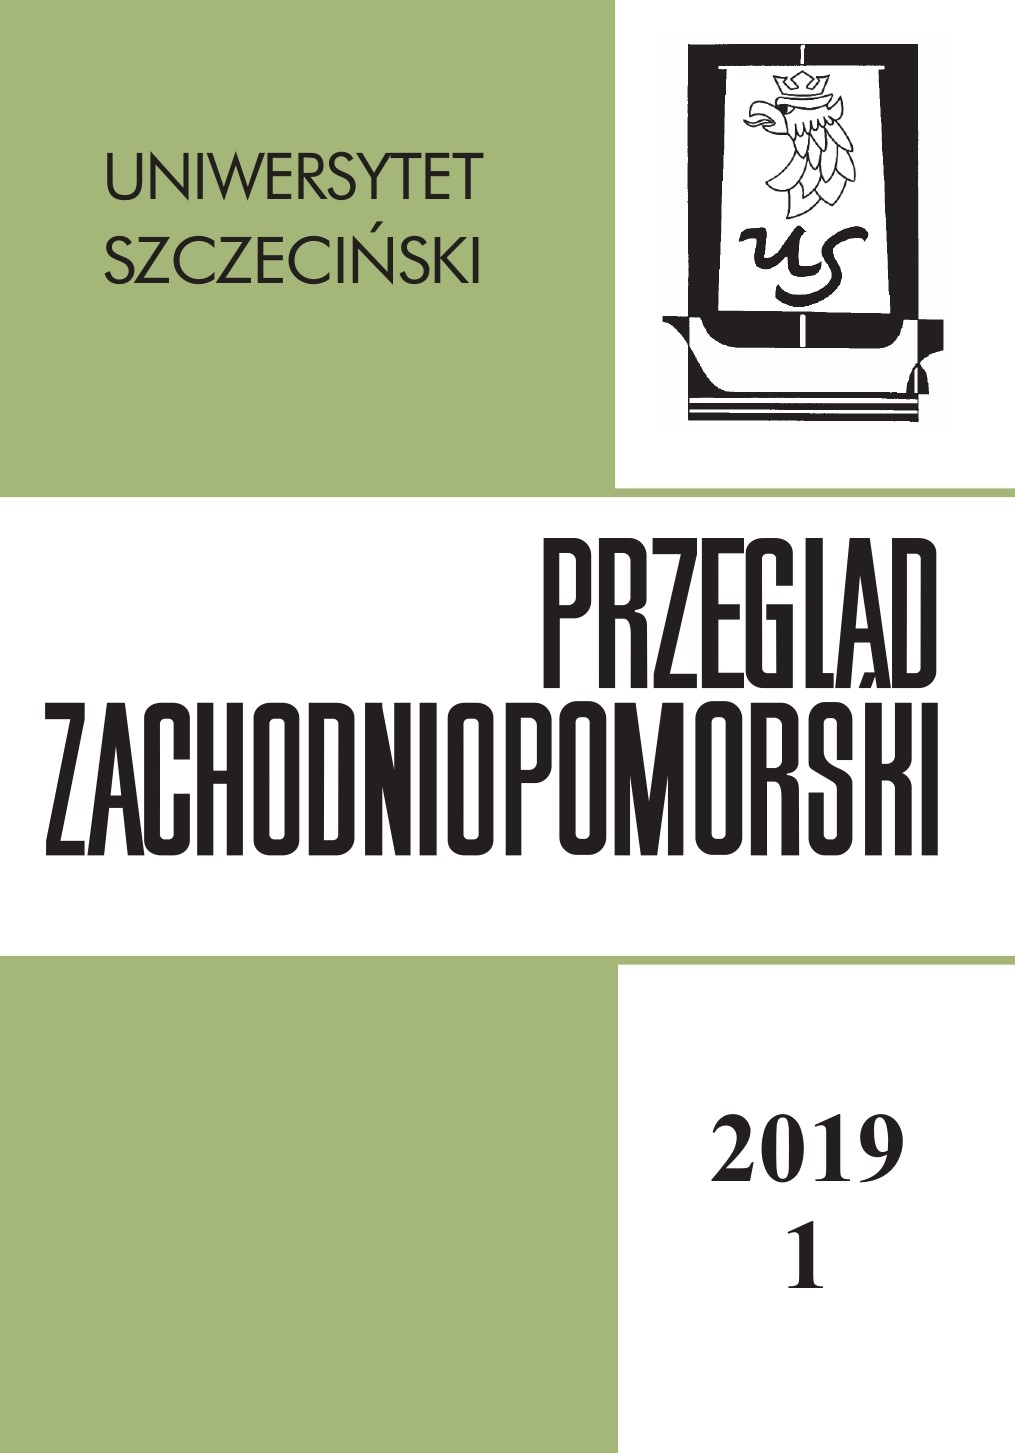 The Concept of Slow Tourism and Creative Education –
a Chance for Sustainable Development of the Rural Areas and the Whole Region. A Case Study of the Village of Bełczna in the County of Łobez (West Pomerania) Cover Image